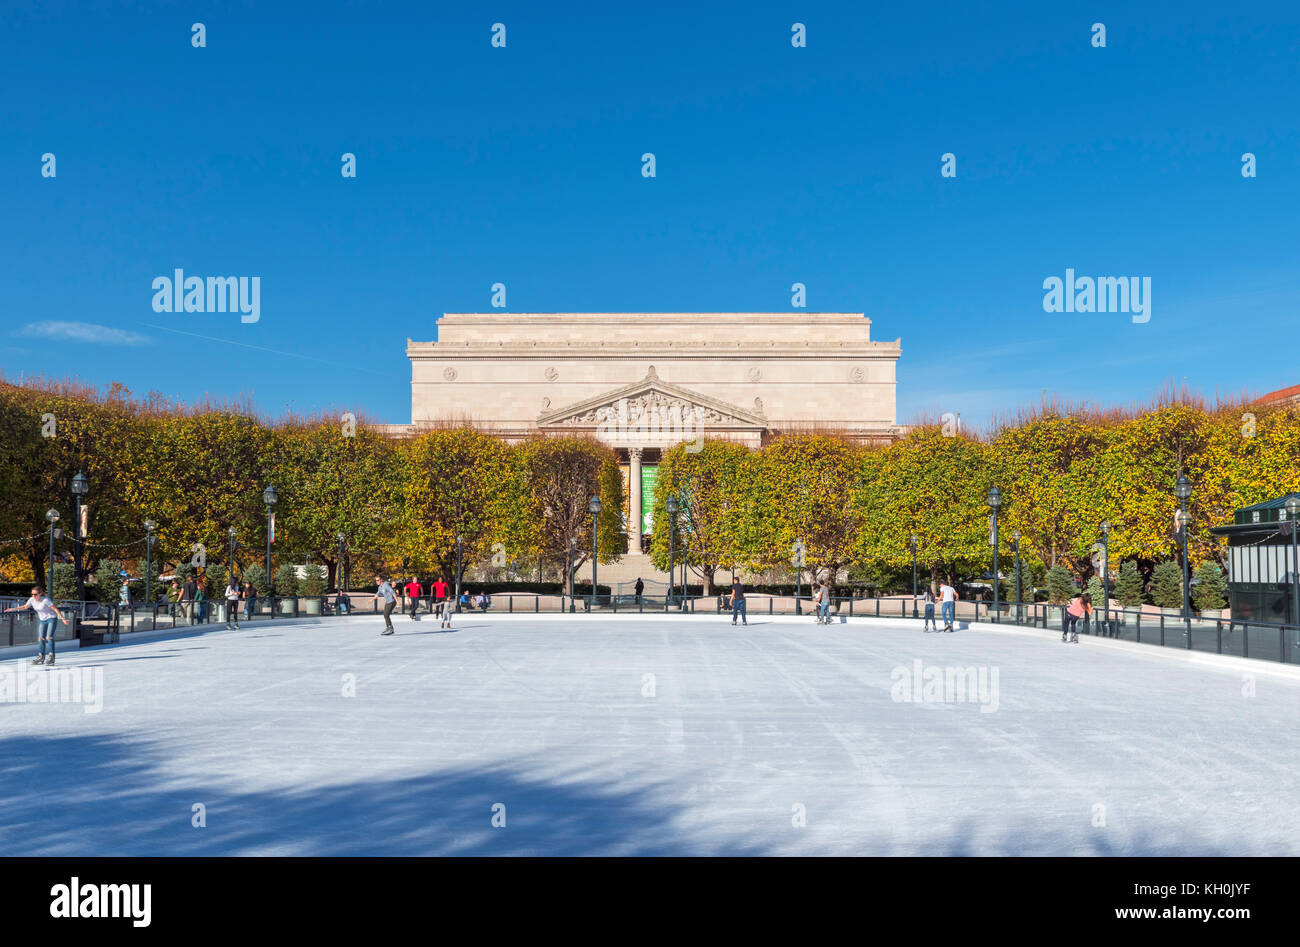 Skating rink in front of the National Archives Building, National Gallery Sculpture Garden, Washington DC, USA Stock Photo